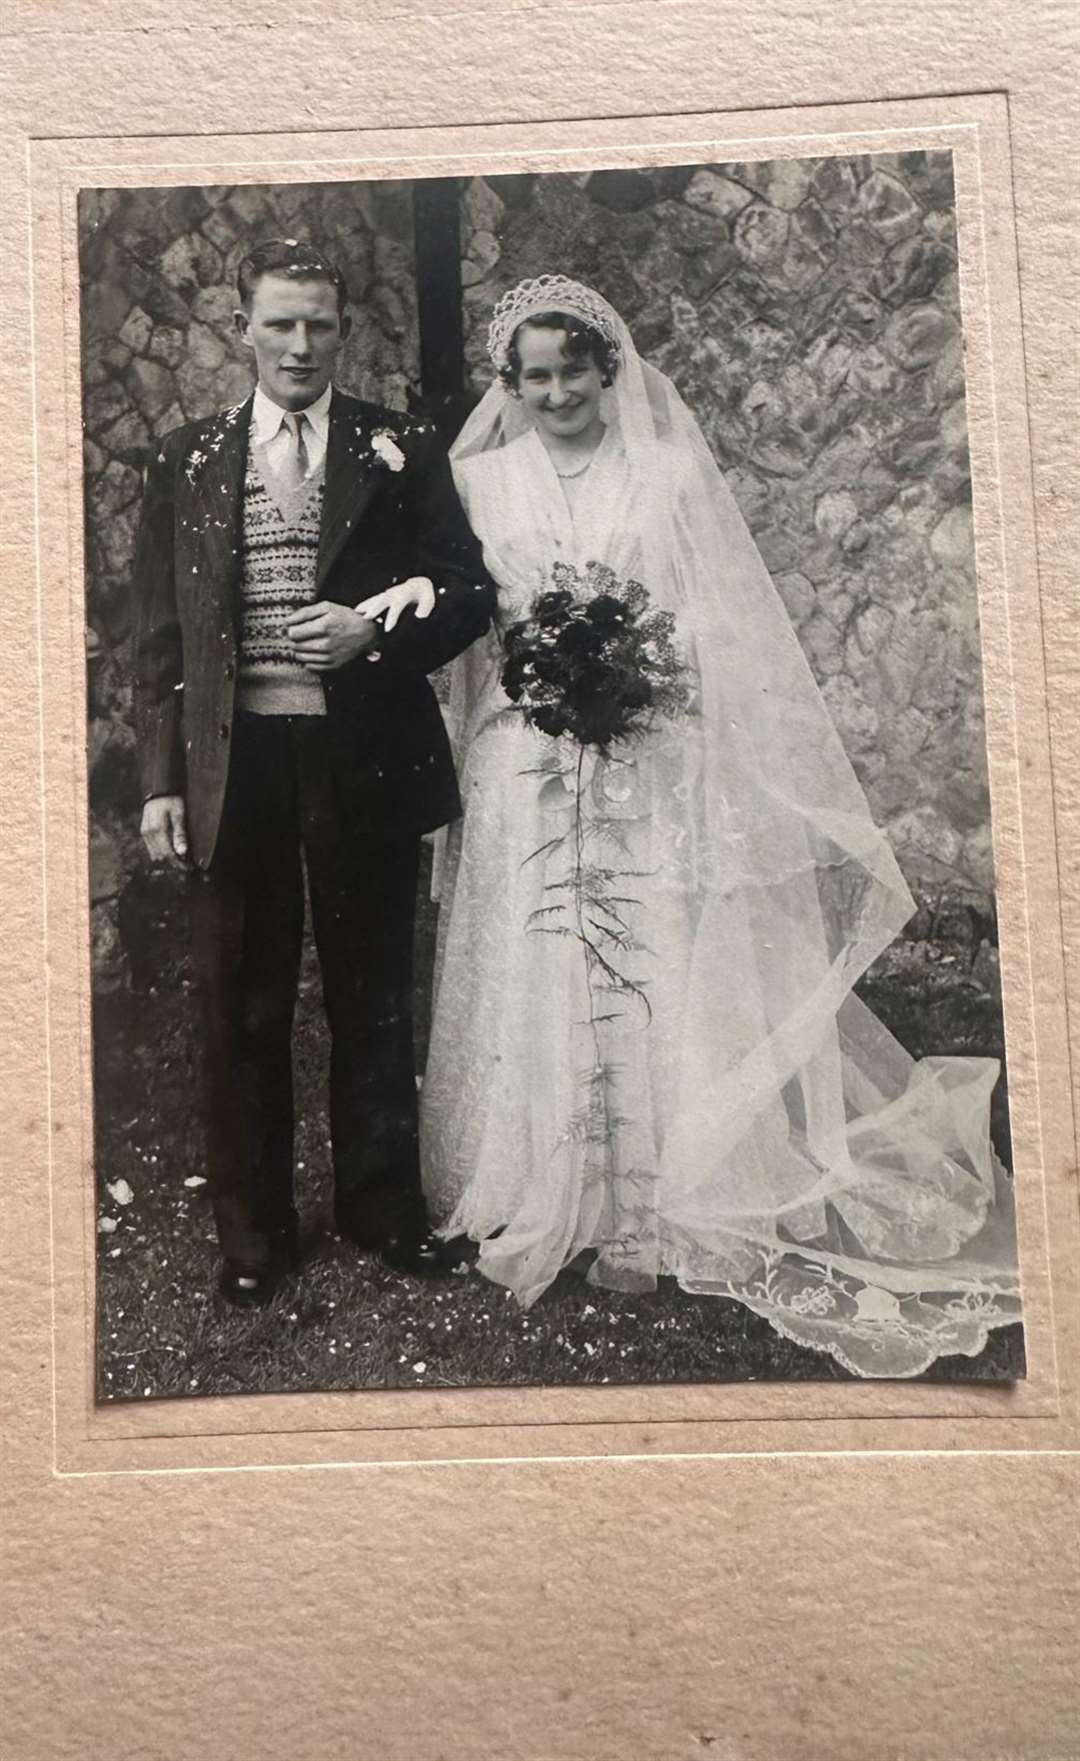 The pair married in Luton church in 1954. Photo: Mr and Mrs Wills